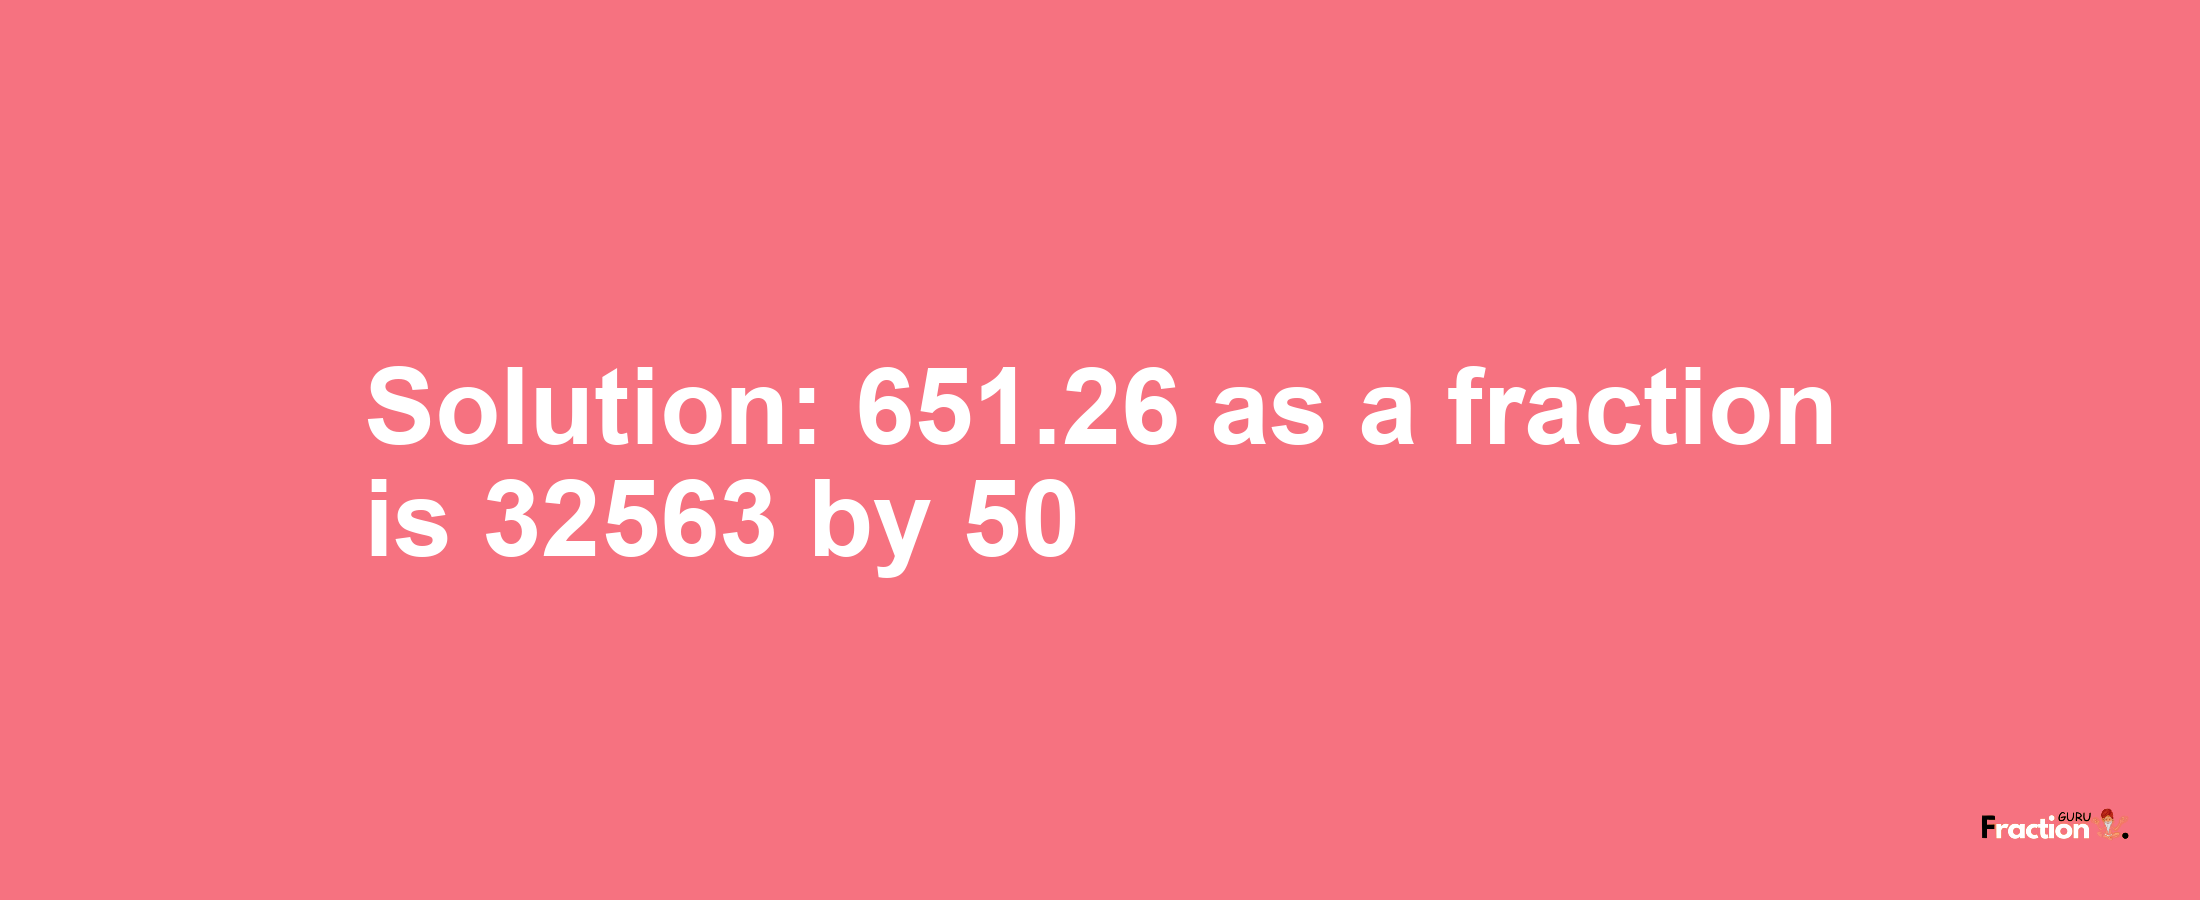 Solution:651.26 as a fraction is 32563/50